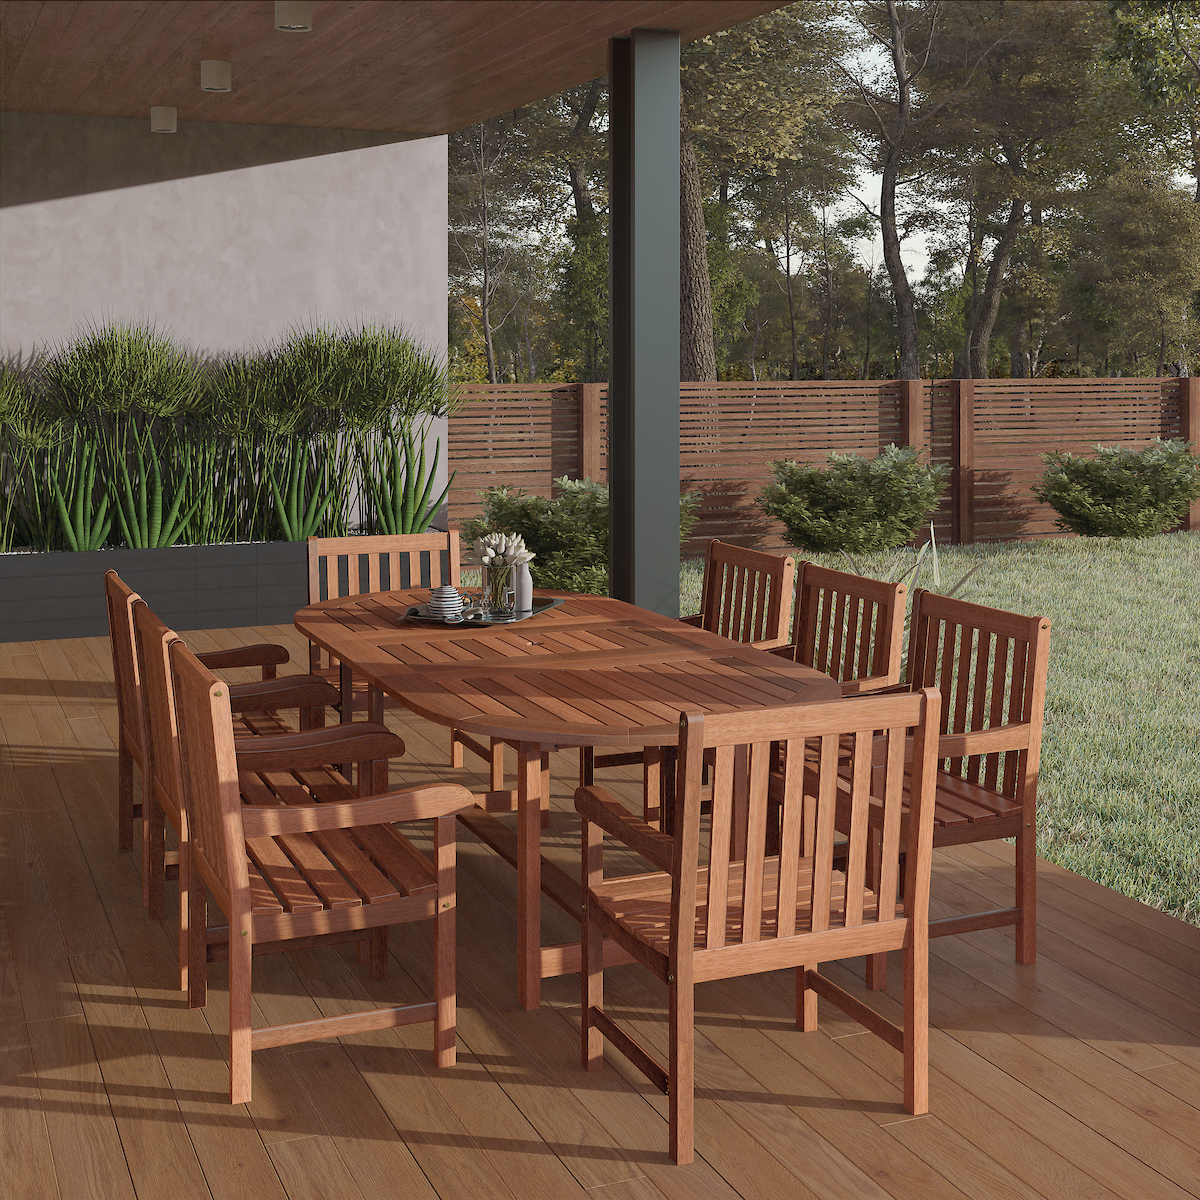 Amazonia Milano 9-Piece Oval Extendable Patio Dining Set, Eucalyptus Wood, Ideal for Outdoors and Indoors - image 1 of 11